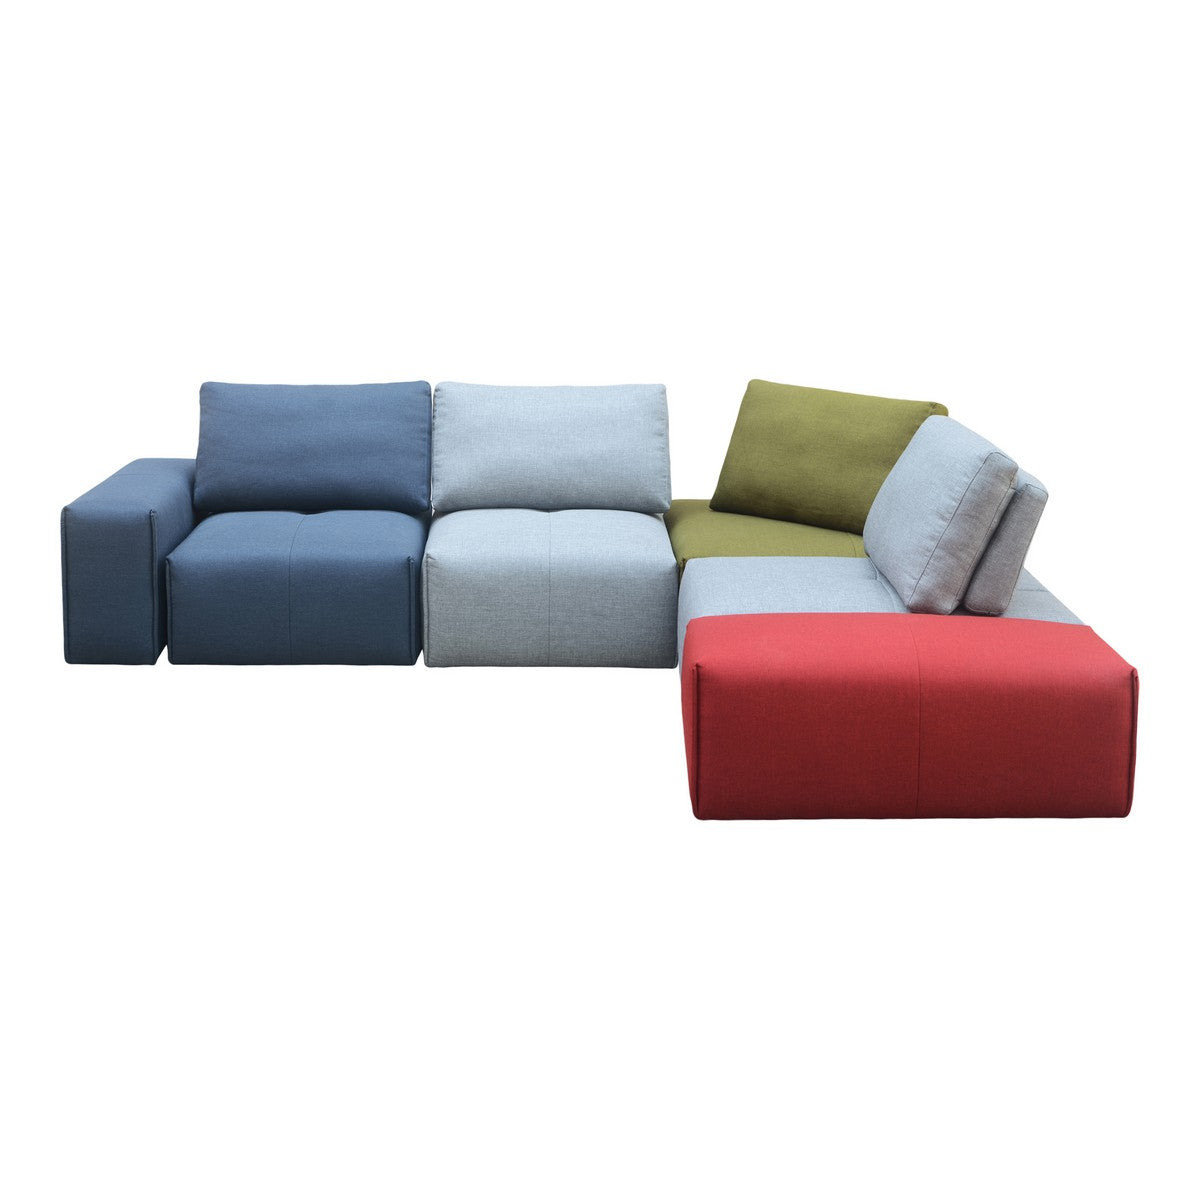 Moe's Home Collection Nathaniel Modular Sectional Multicolor - MT-1011-37 - Moe's Home Collection - Extras - Minimal And Modern - 1